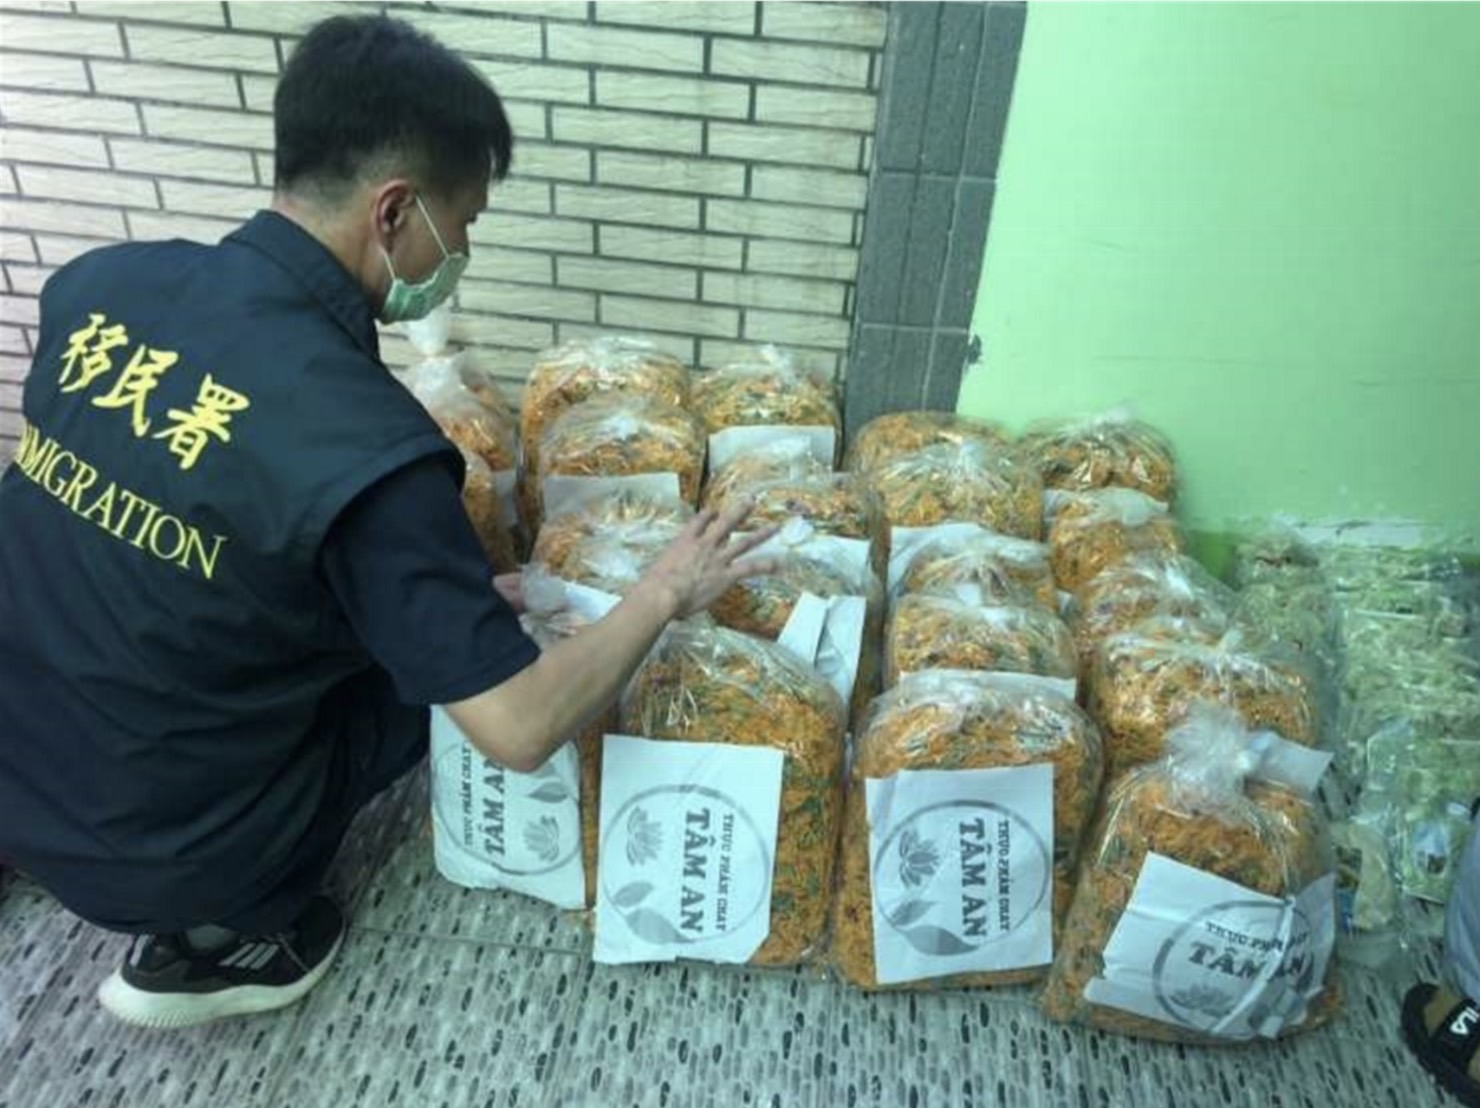 The National Immigration Agency seized Vietnamese pork products of unknown origin which tested positive for African swine fever. (Photo/provided by the National Immigration Agency)